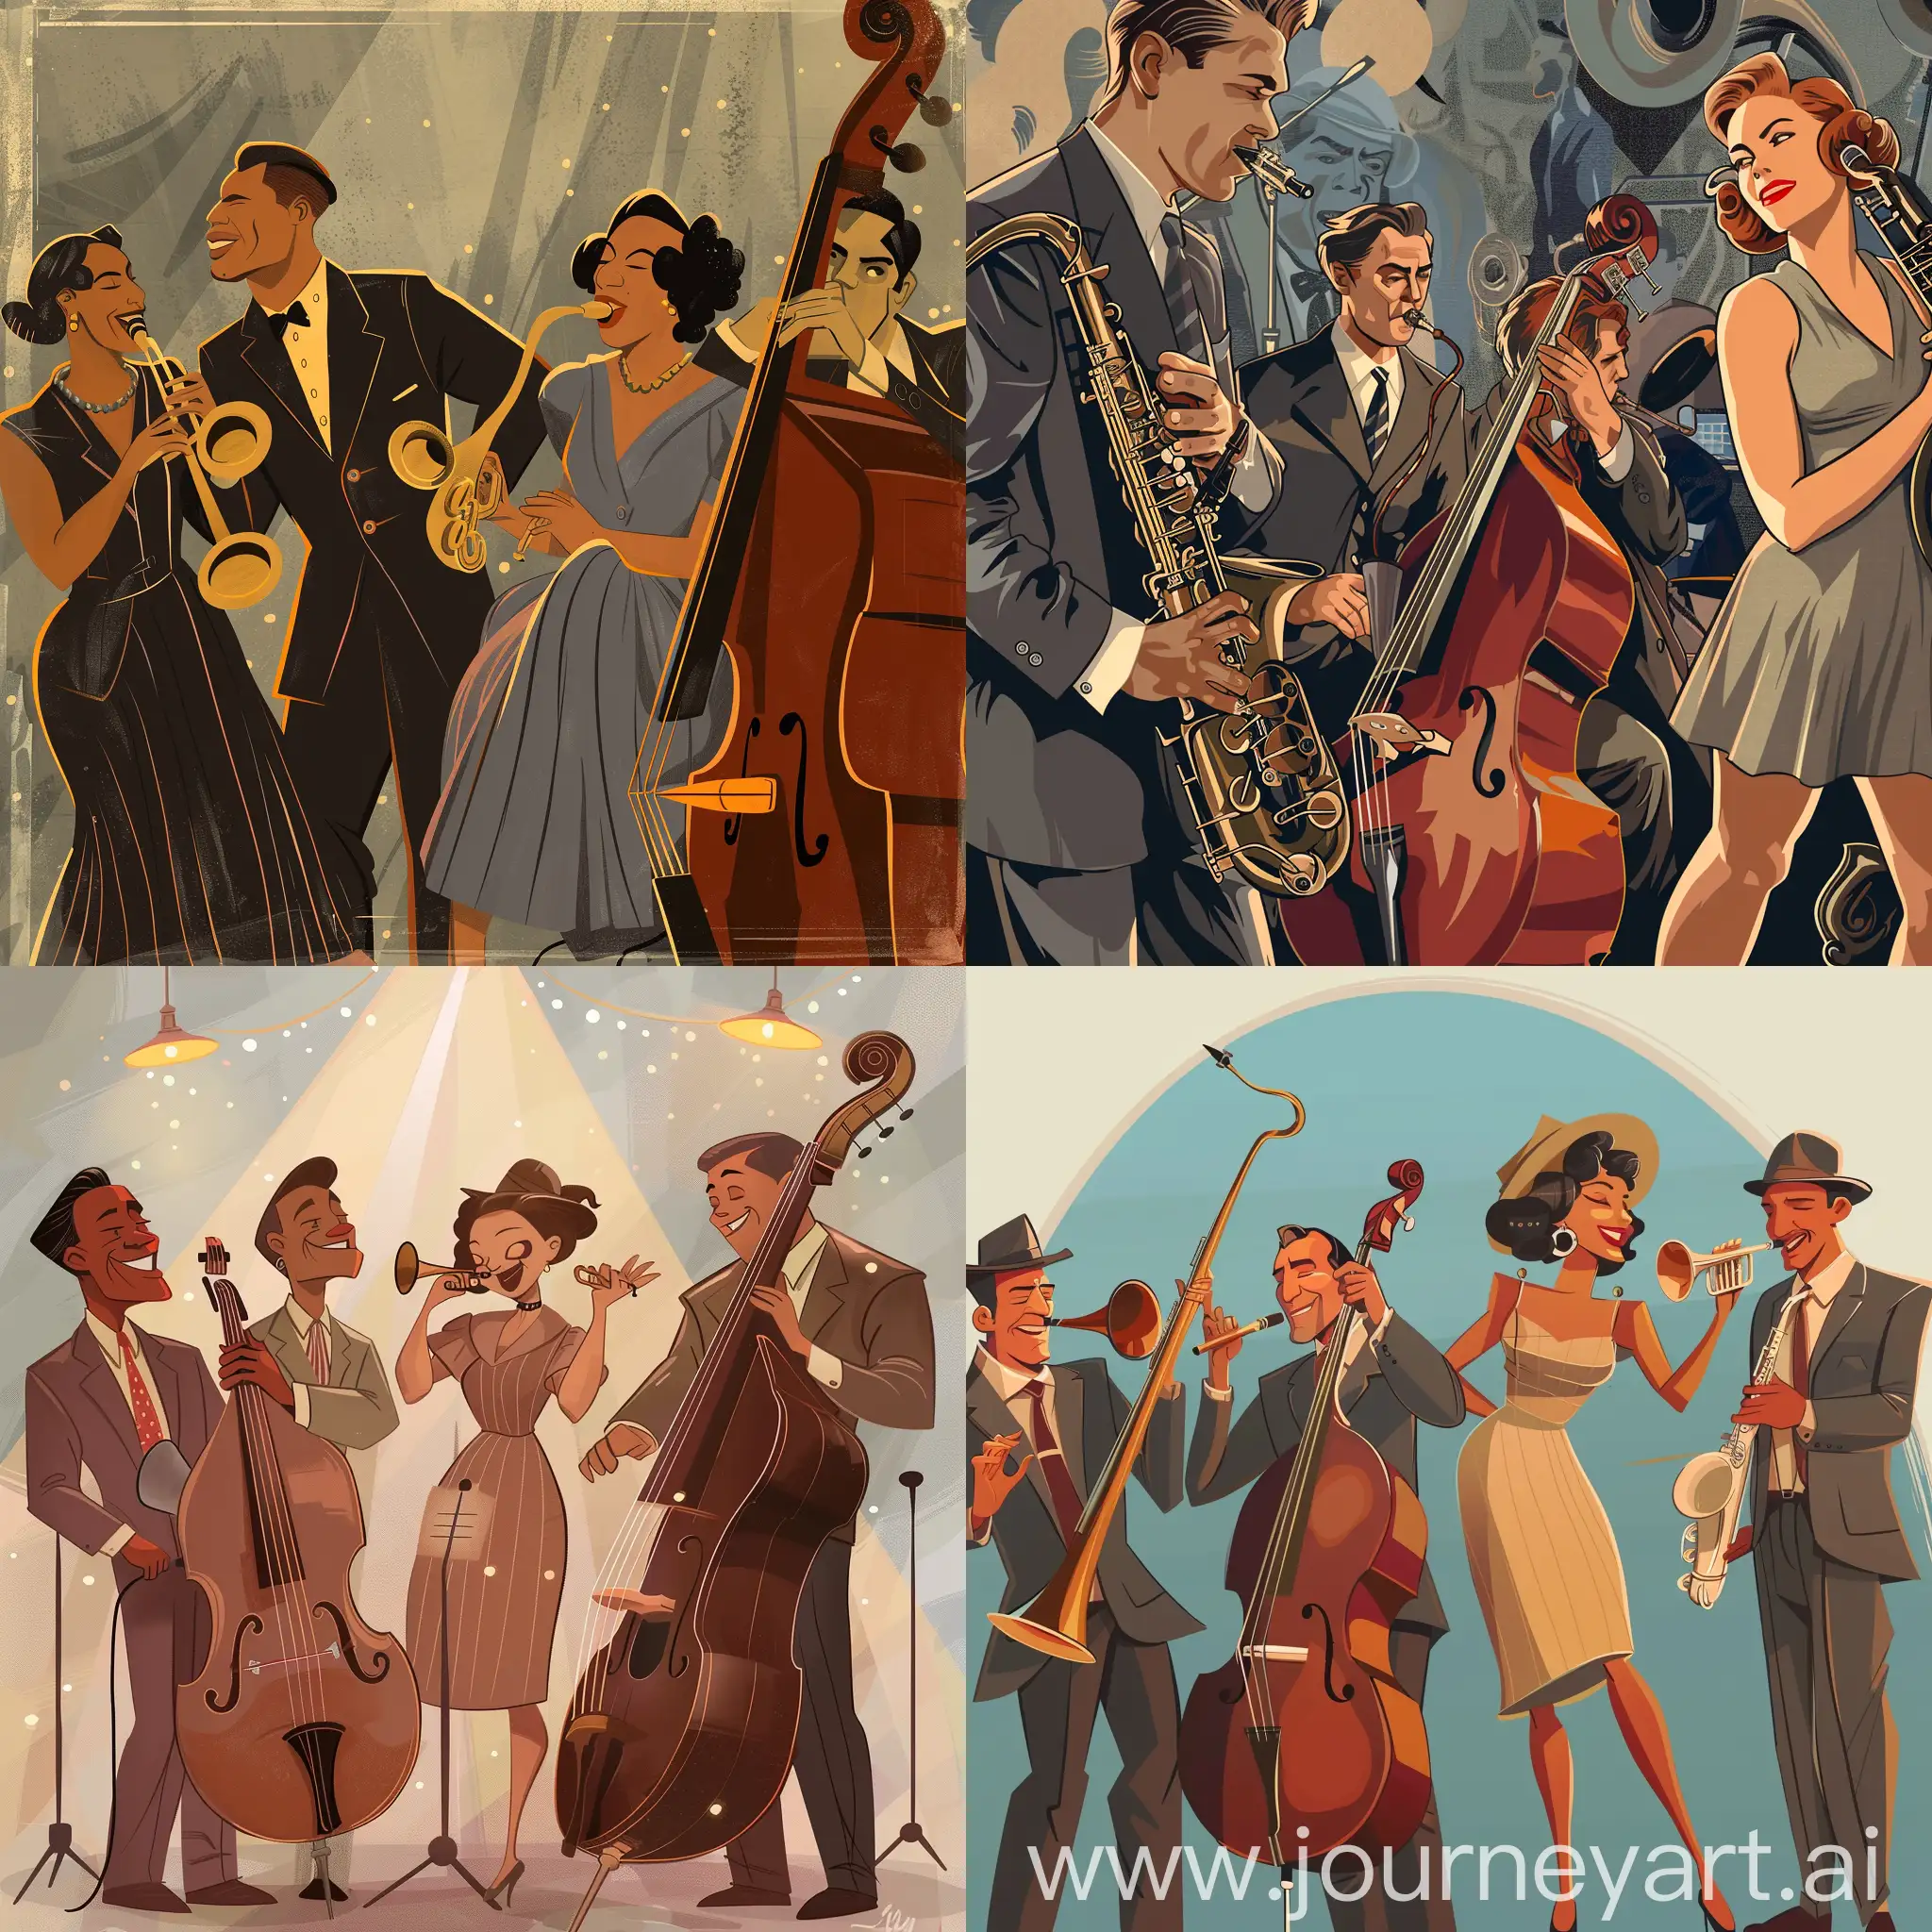 Lilliepad97-Style-Illustration-of-a-1940s-Jazz-Band